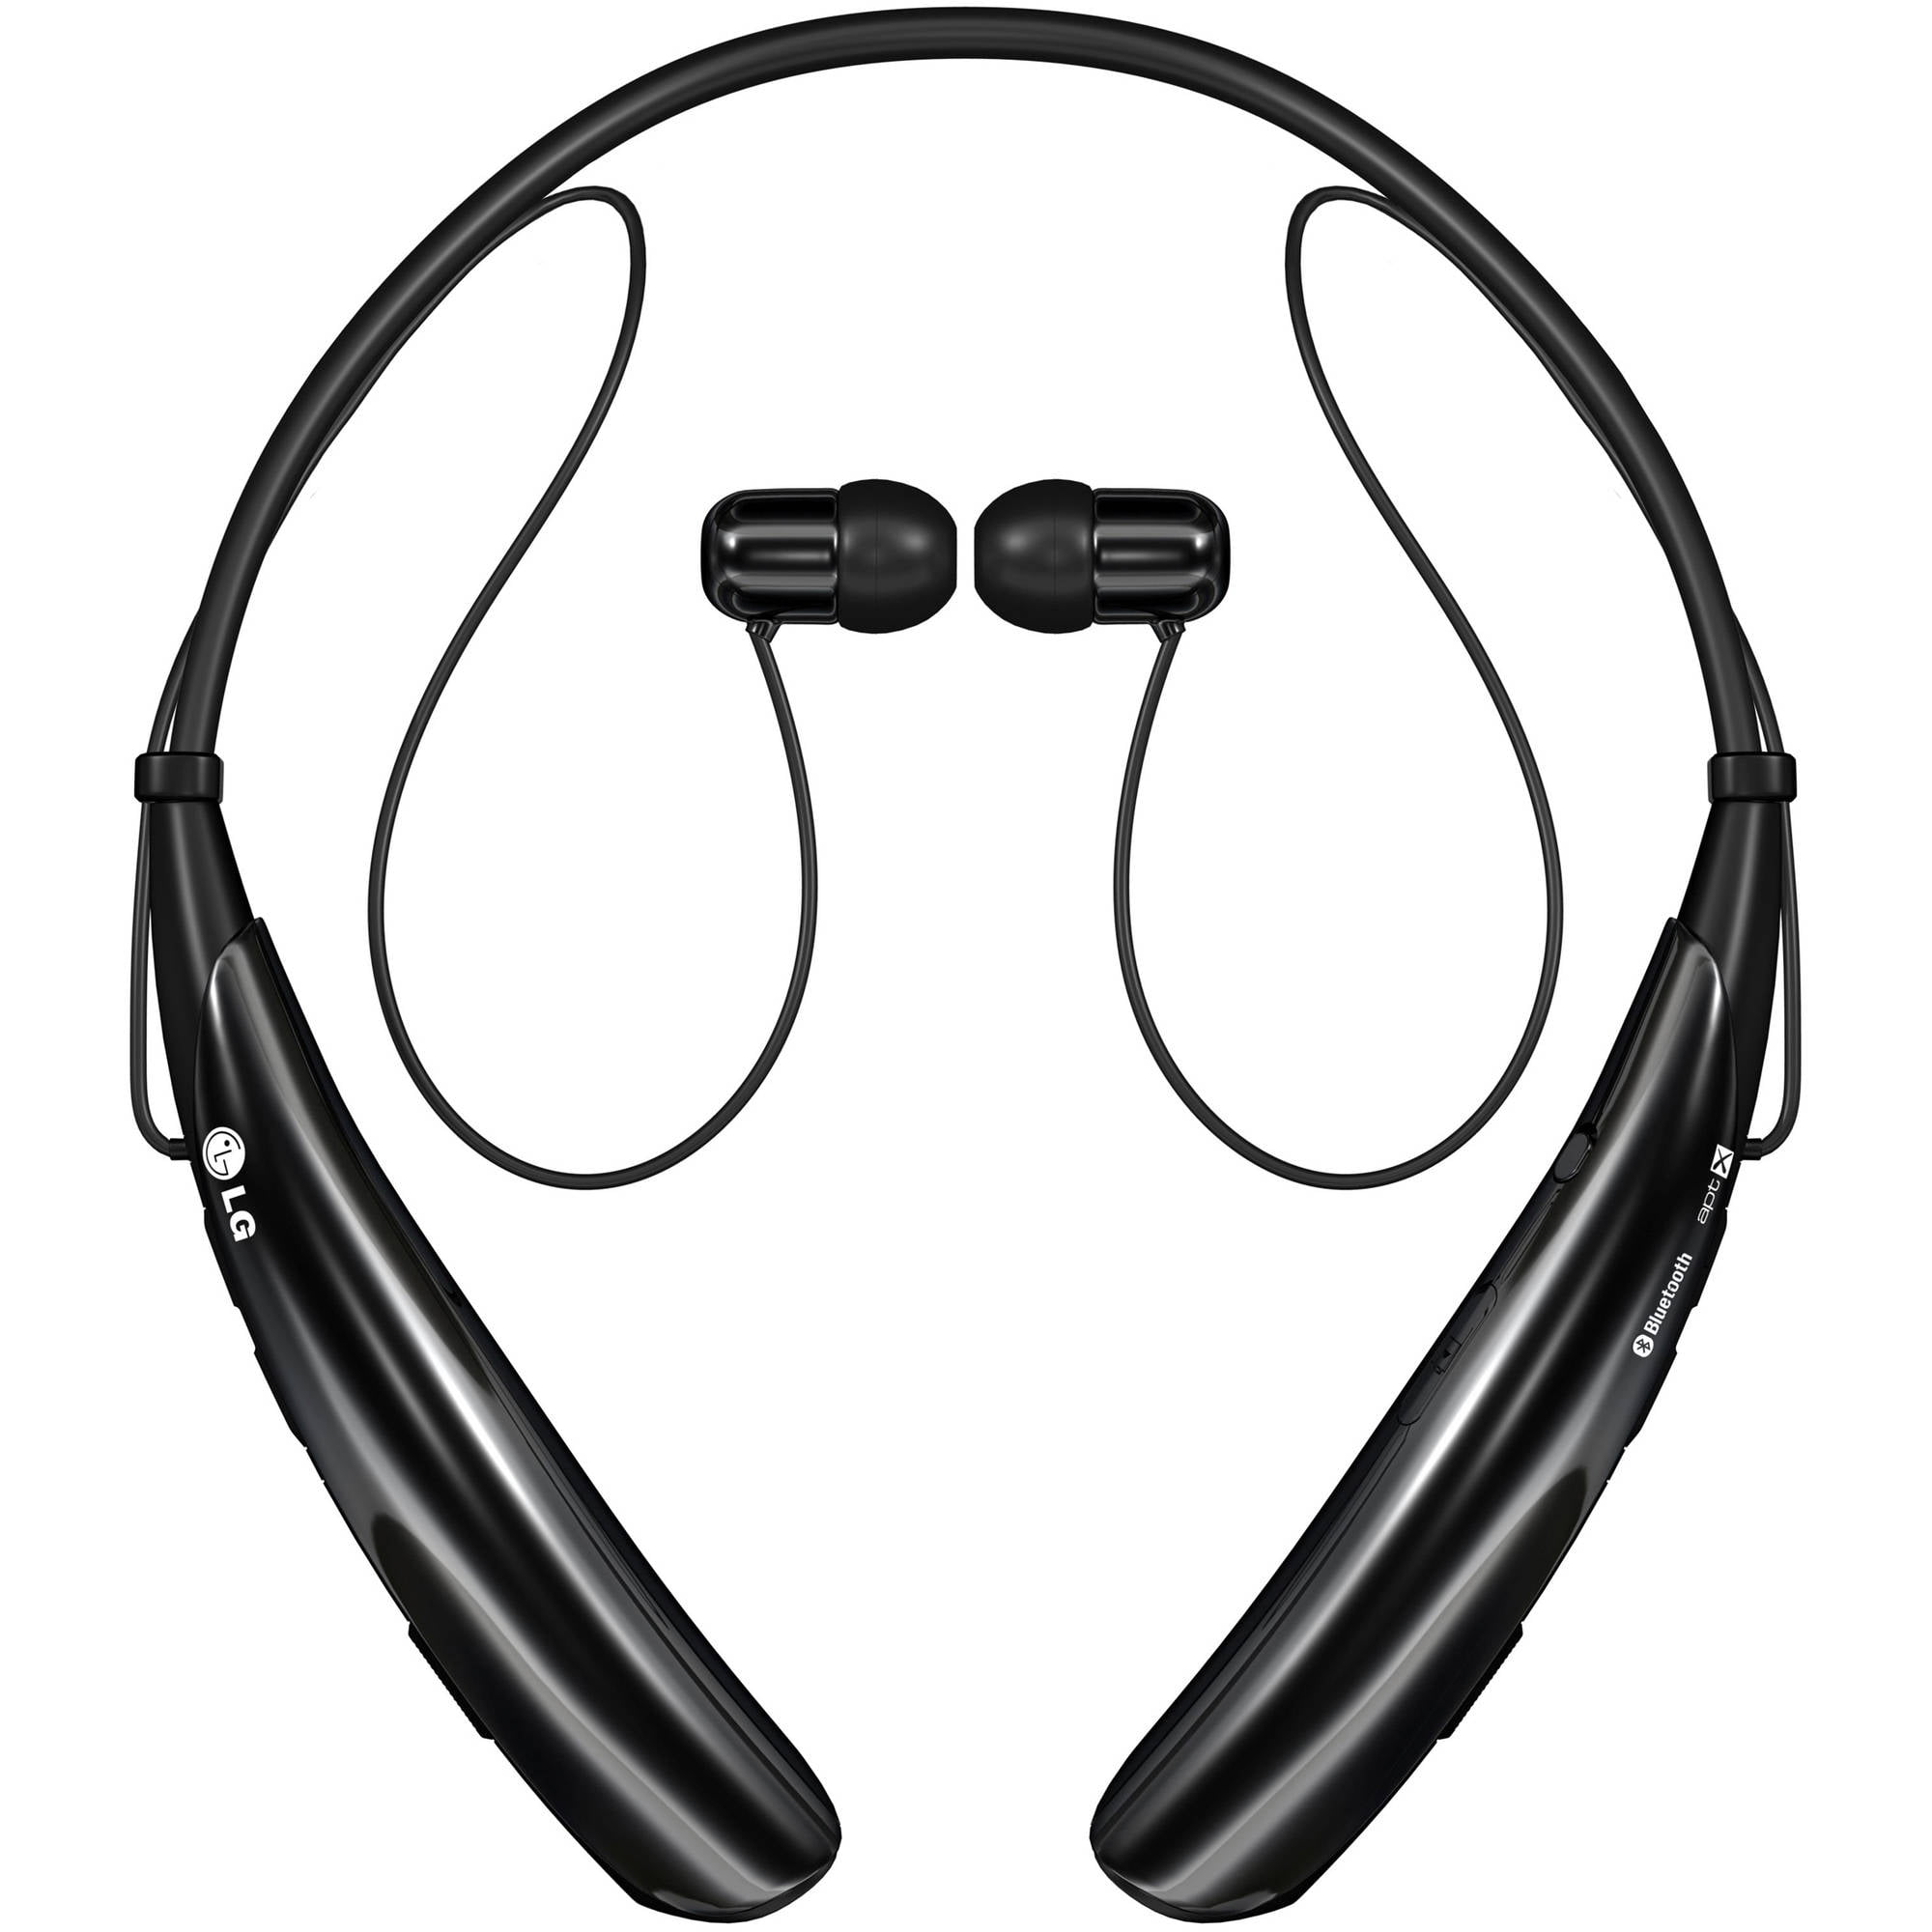 What are some good choices for a kid's wireless headset?